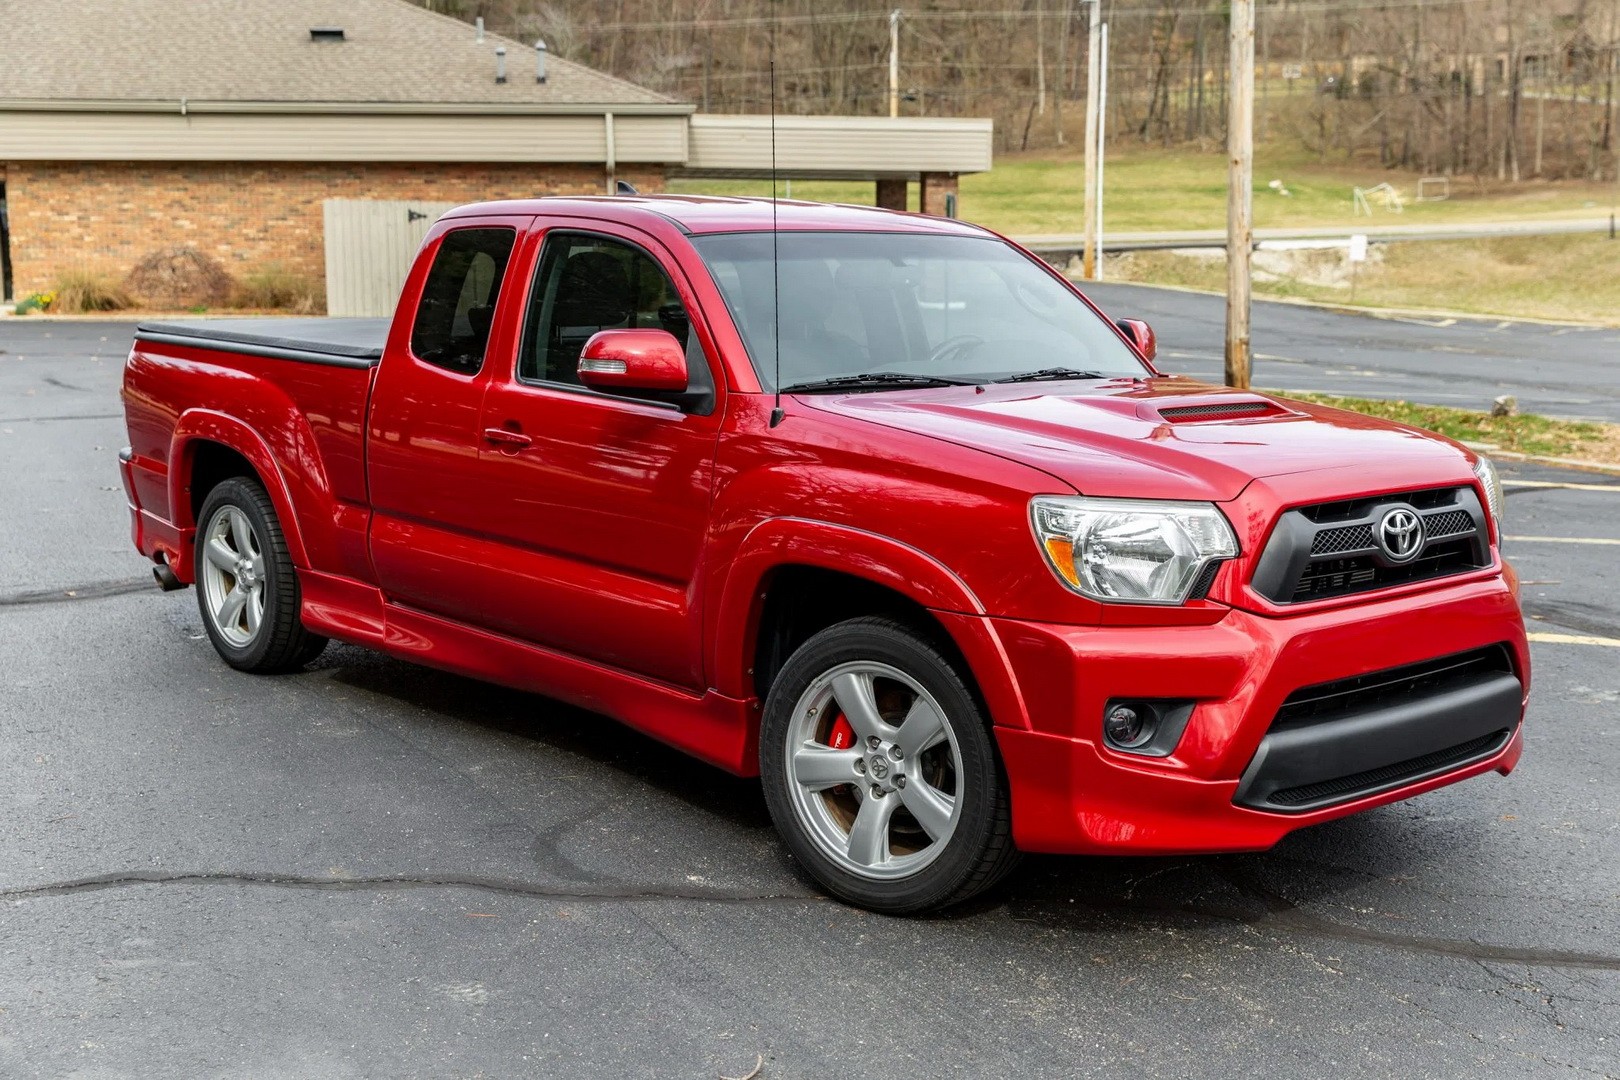 Supercharged 2012 Toyota Tacoma X-Runner Is a Blue-Collar Driver’s